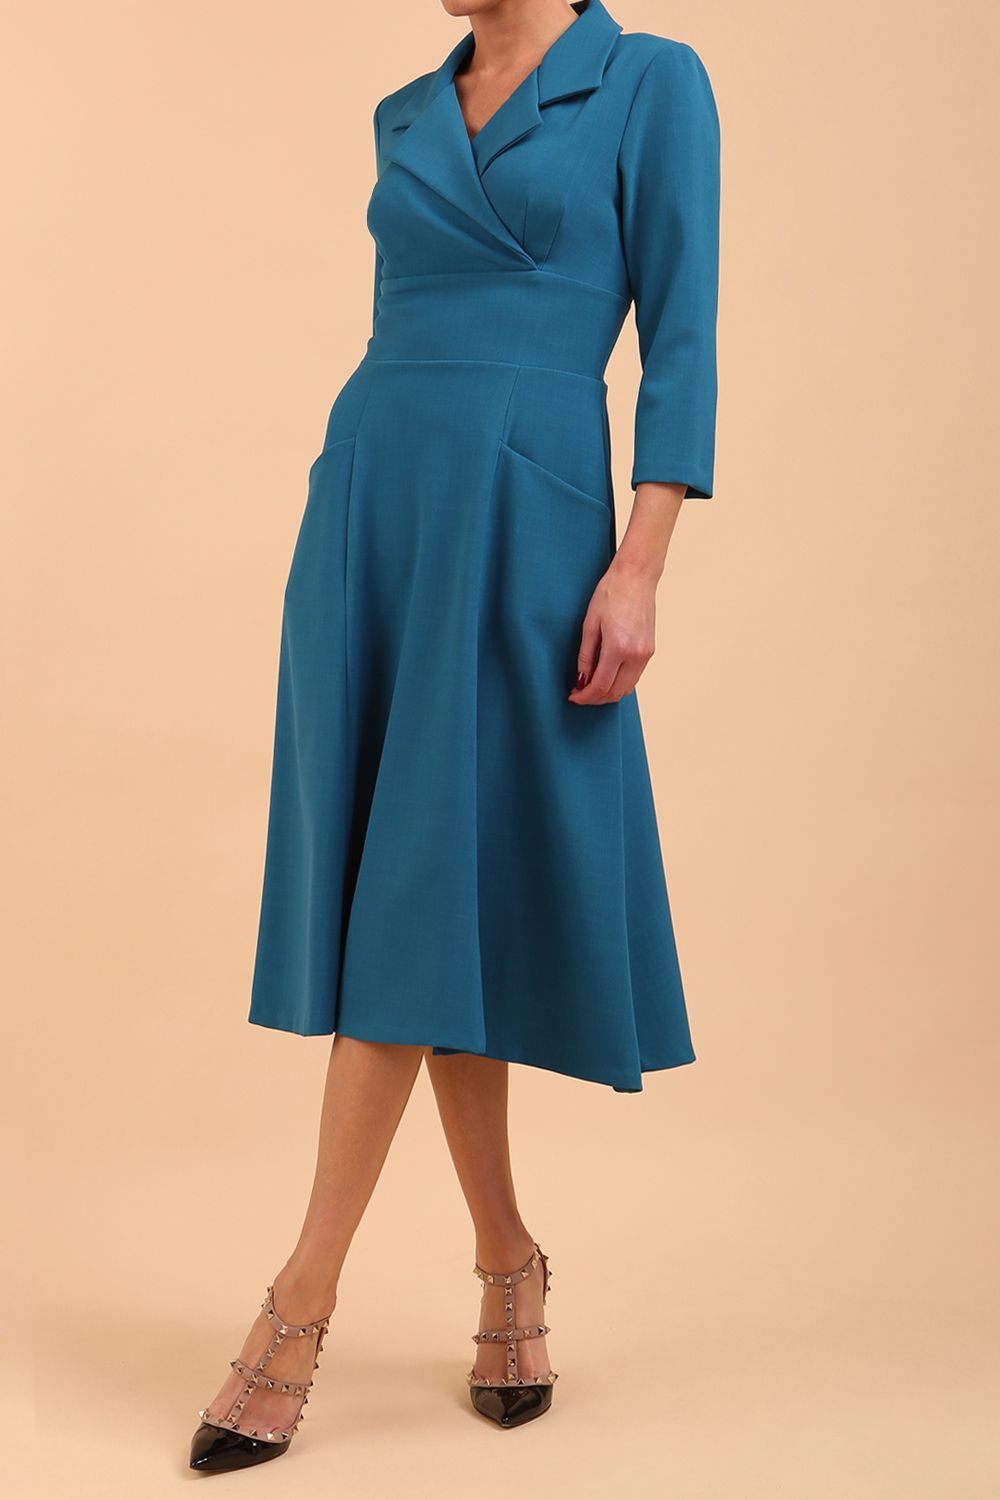 A model is wearing a swing wine three quarter sleeve dress with oversized collar and pockets in the skirt